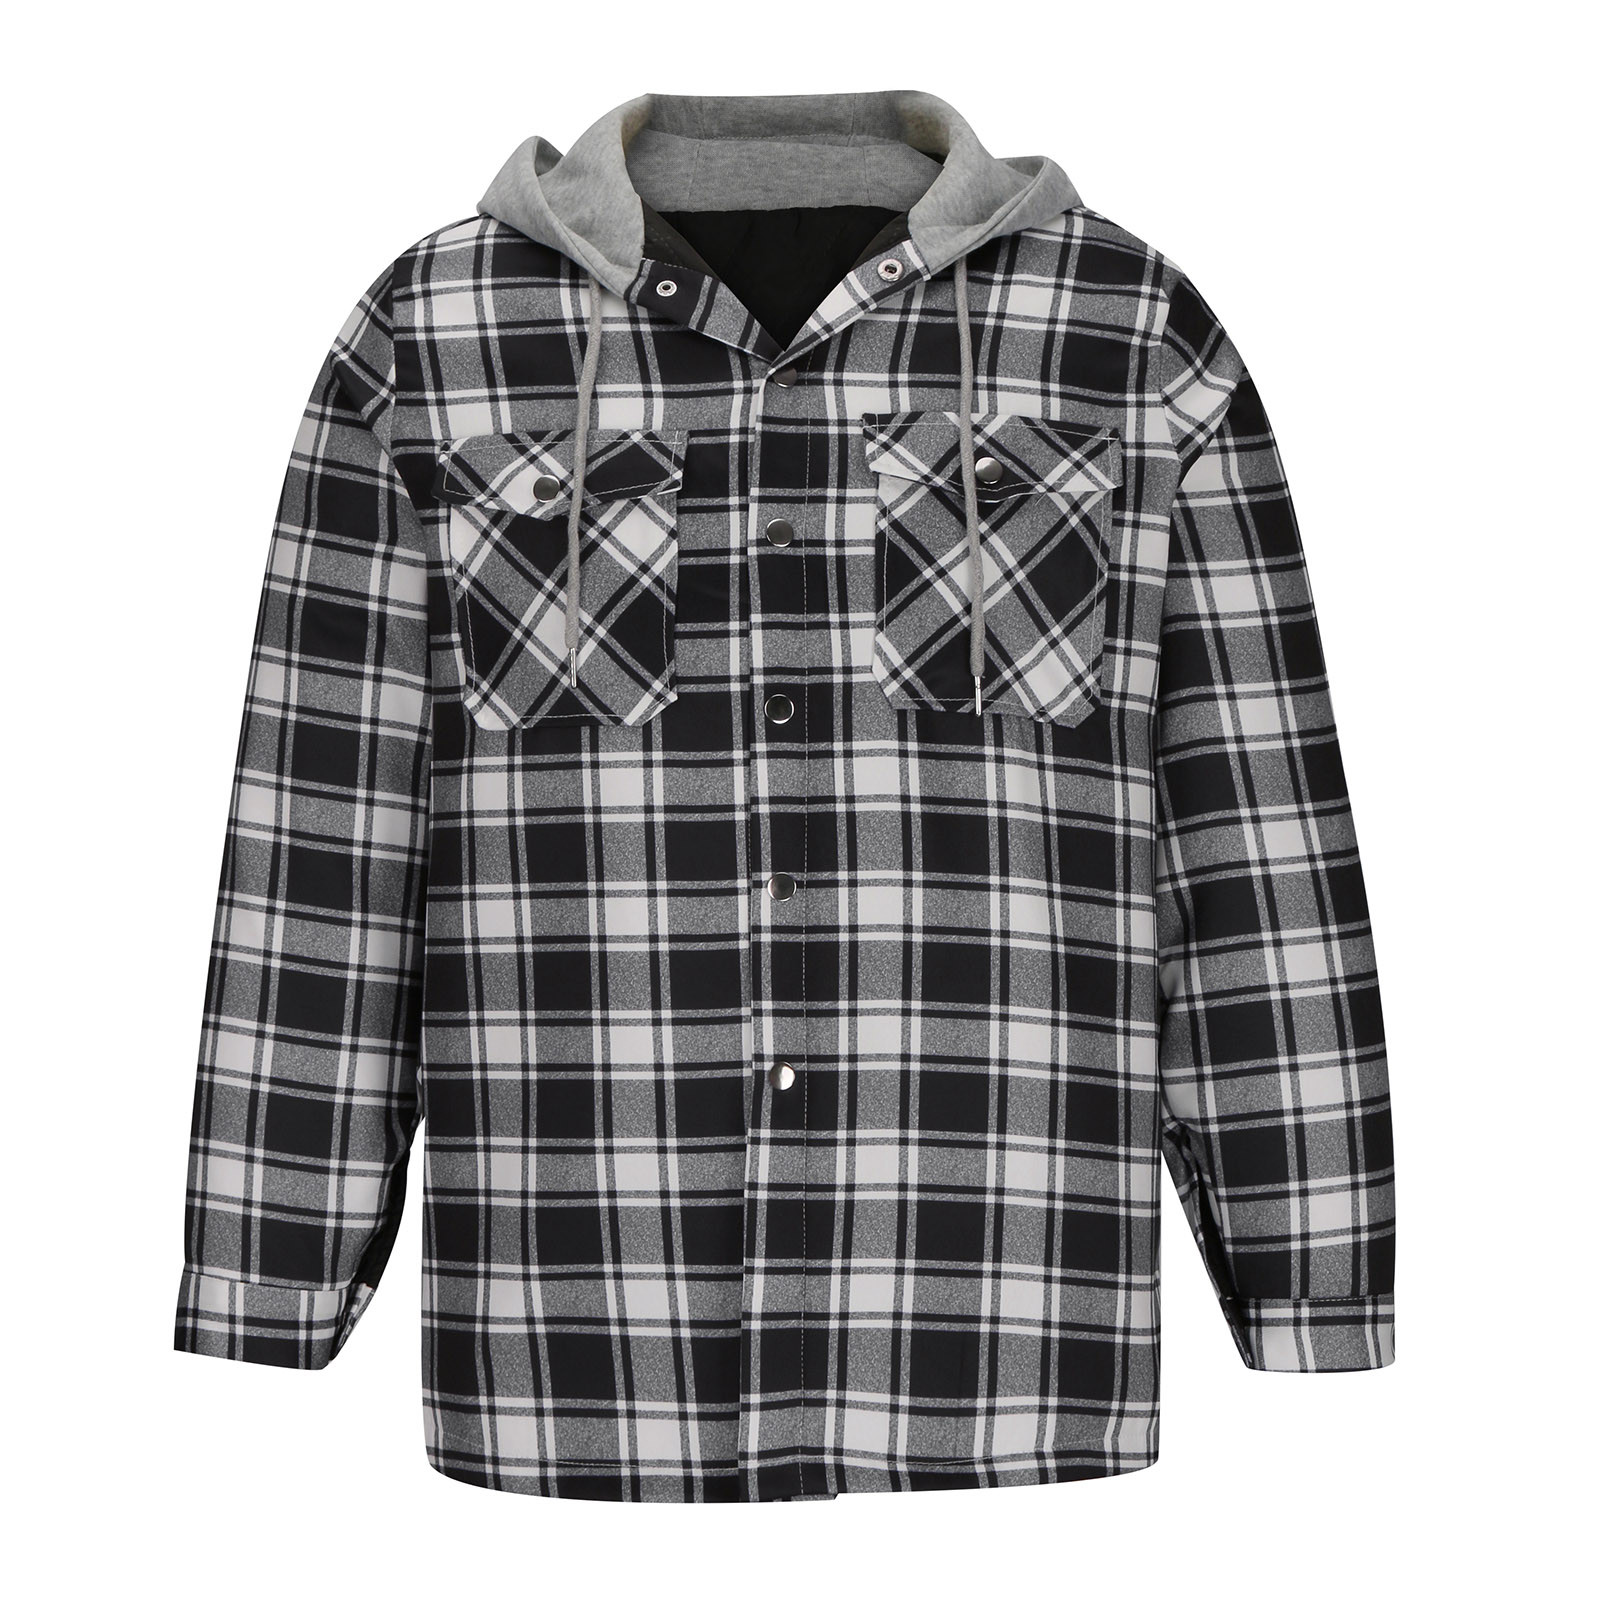 Men's Long Sleeve Lined Flannel Shirt Jacket with Hood Men's Cotton ...